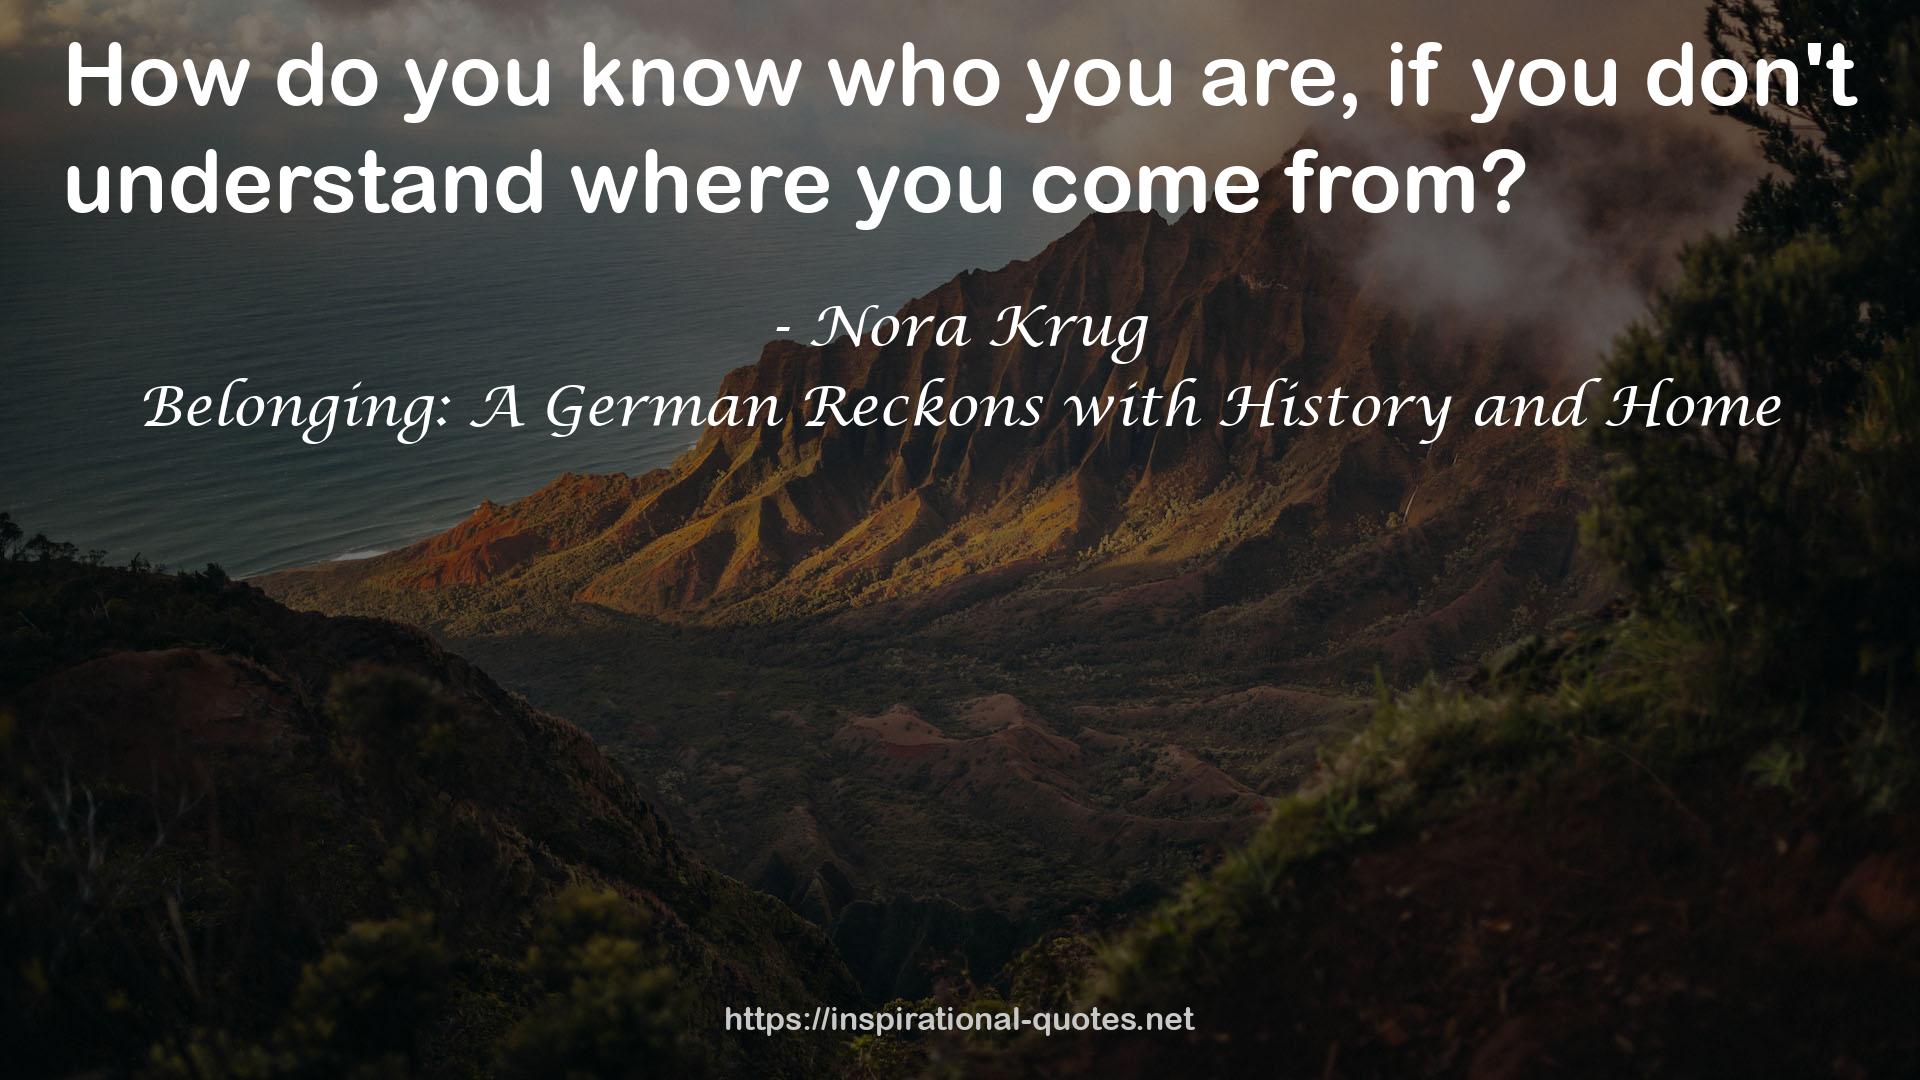 Belonging: A German Reckons with History and Home QUOTES